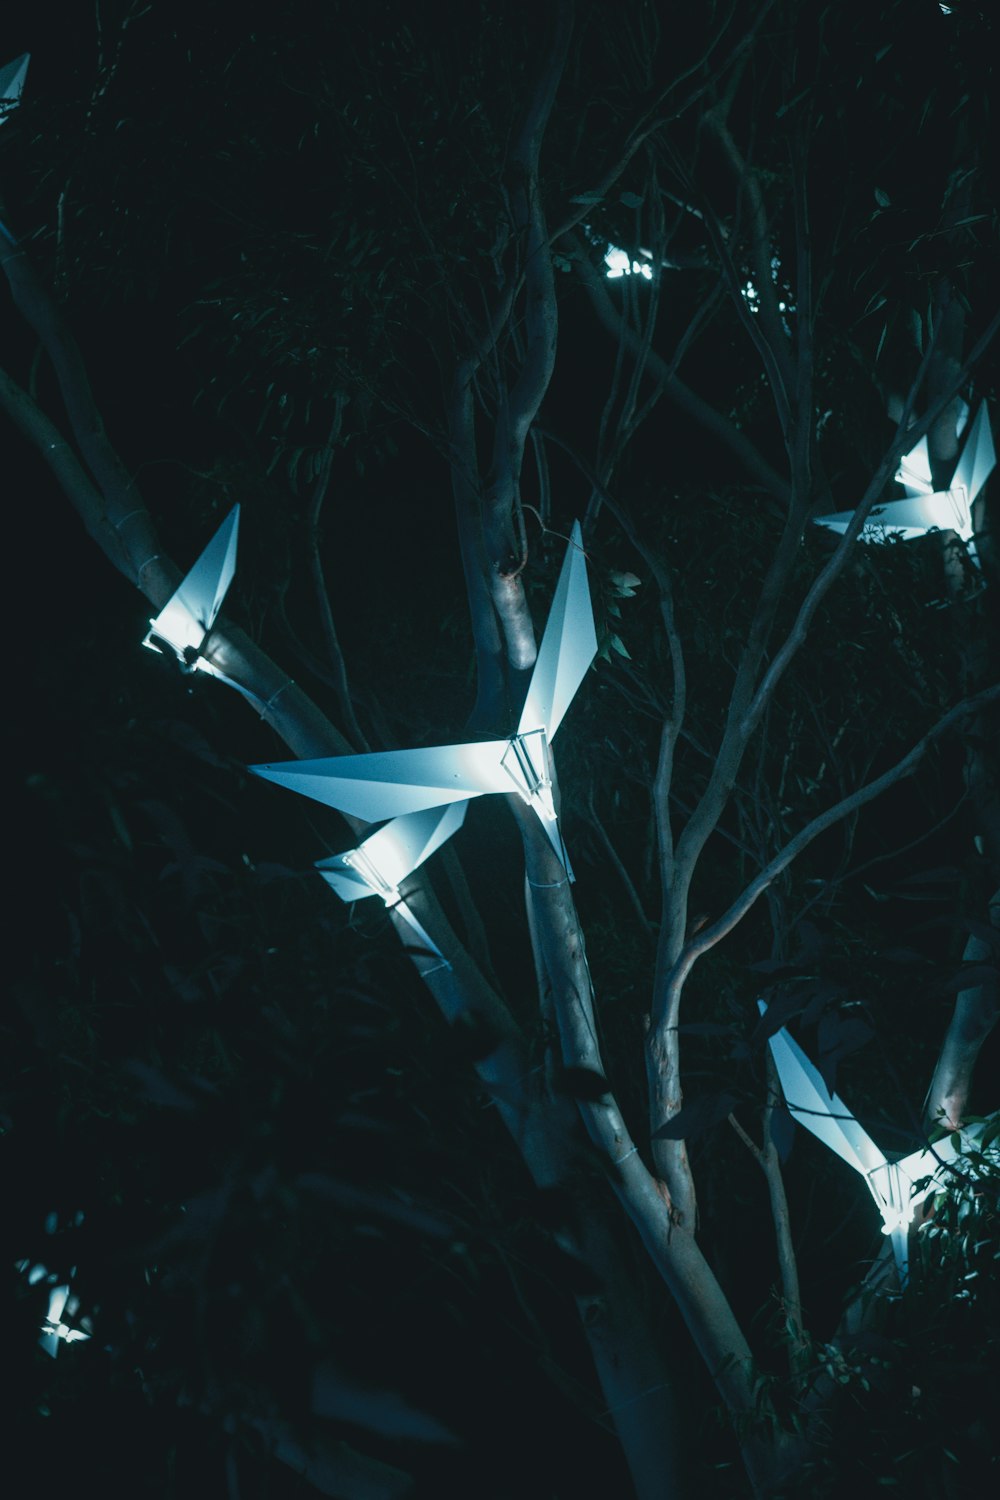 a group of origami birds flying in the night sky